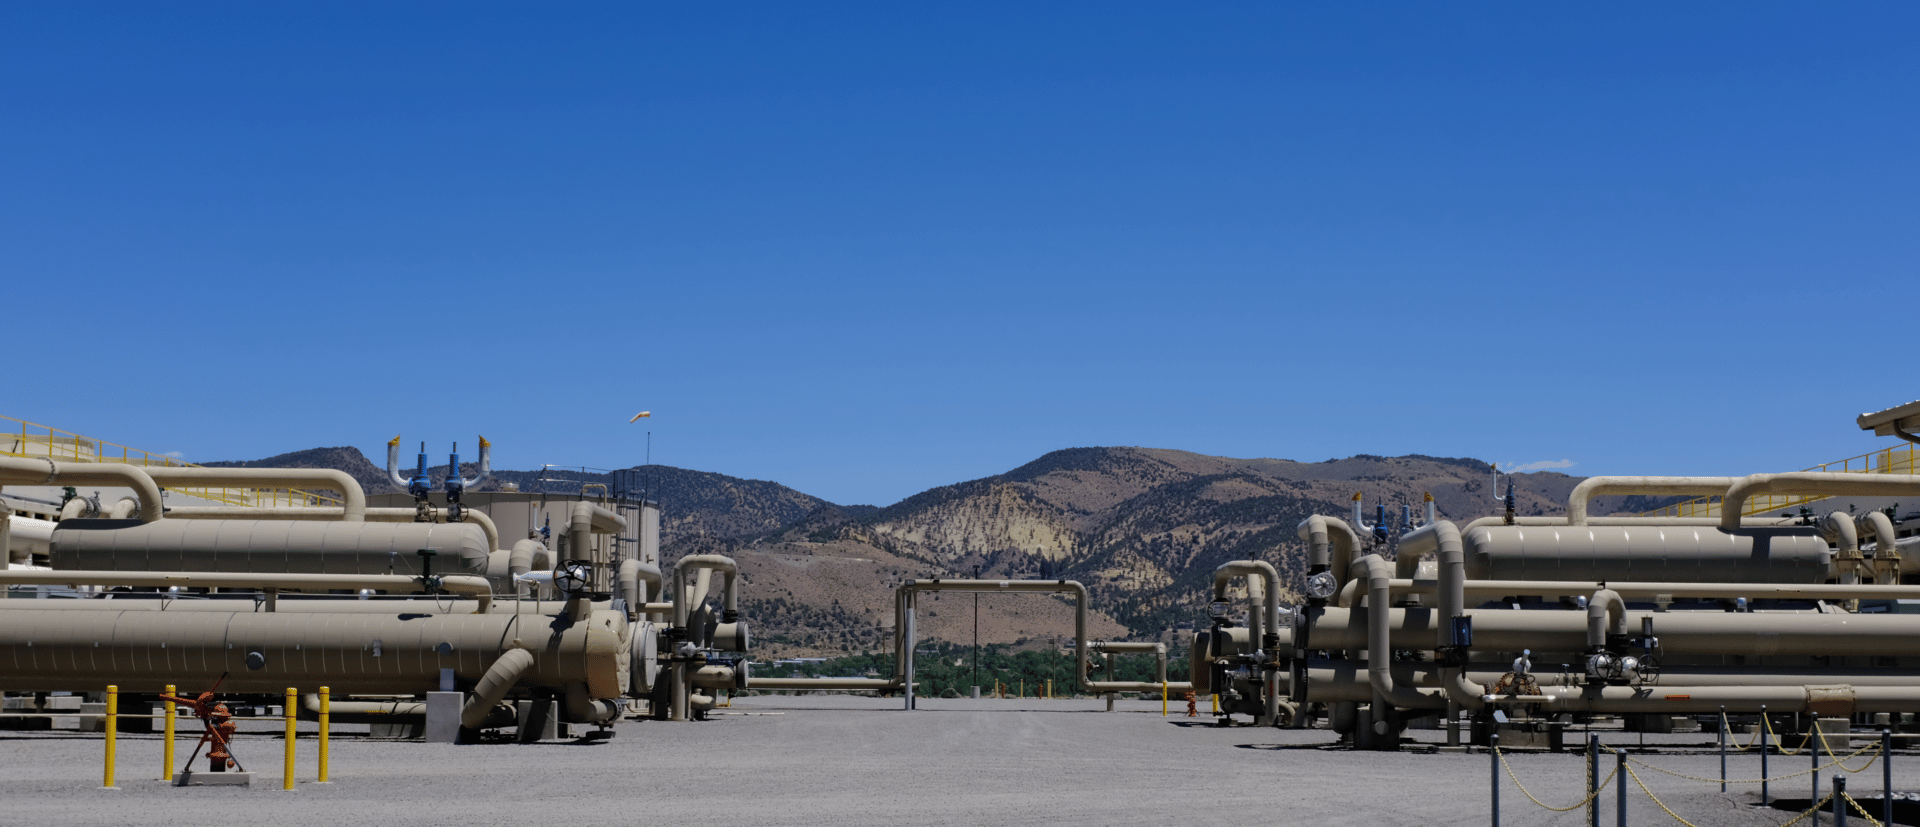 Ormat’s Steamboat Hills geothermal power plant, just south of Reno, Nevada. (Jessica McKenzie)